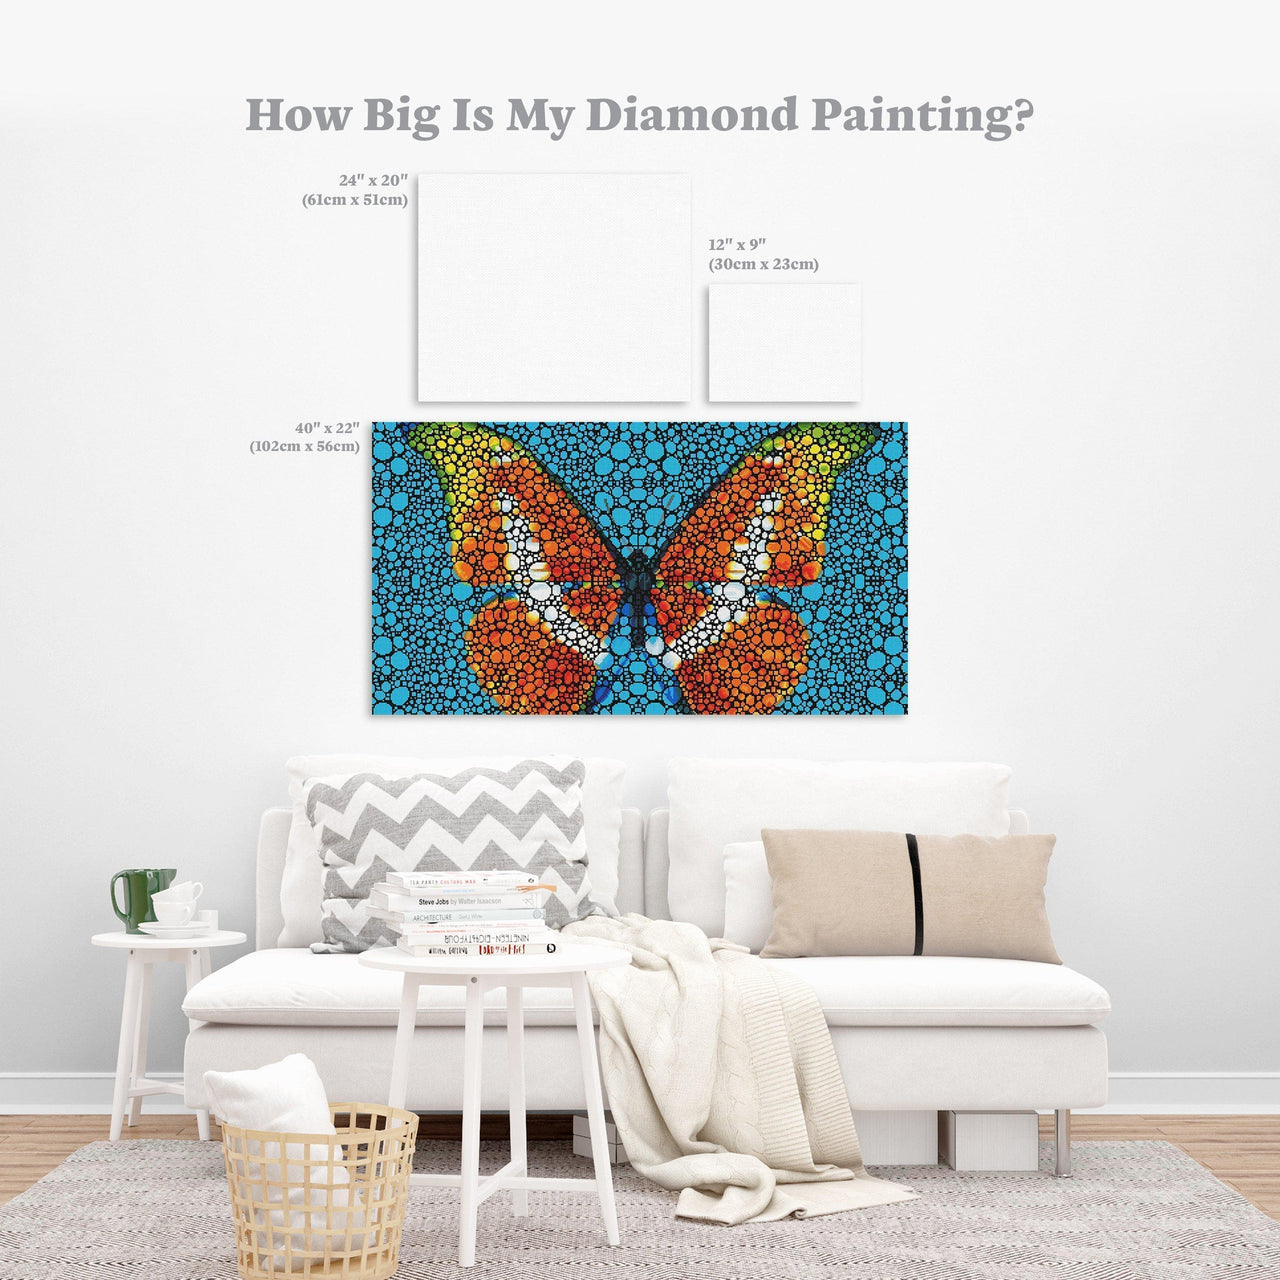 Diamond Painting Butterfly 40" x 22″ (102cm x 56cm) / Square with 32 Colors including 3 ABs / 89,275